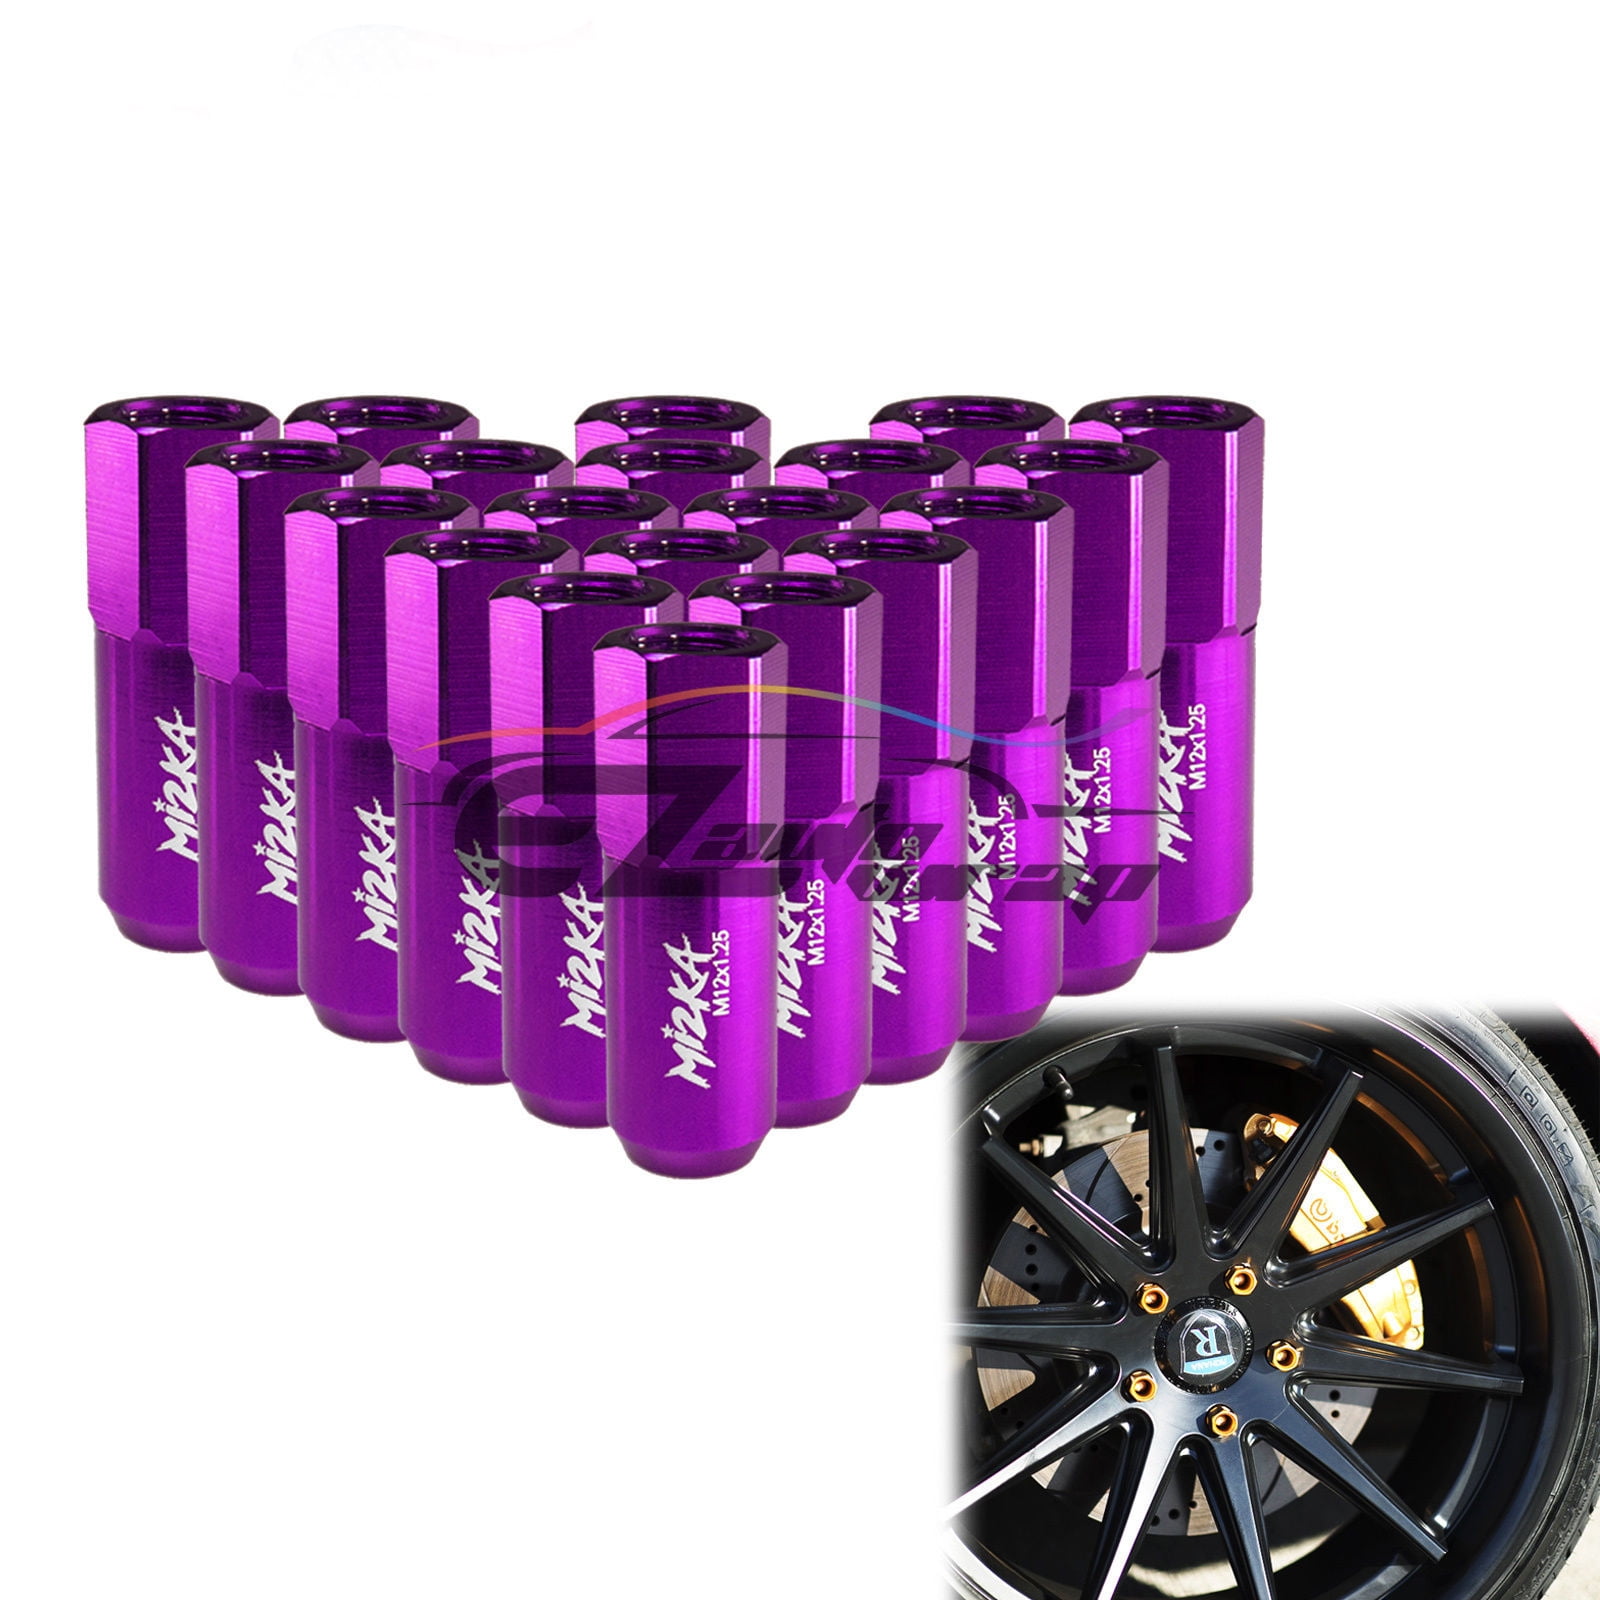 M12X1.5/M12X1.25 Spiked Aluminum Extended Tuner Wheels Rims Lug Nuts